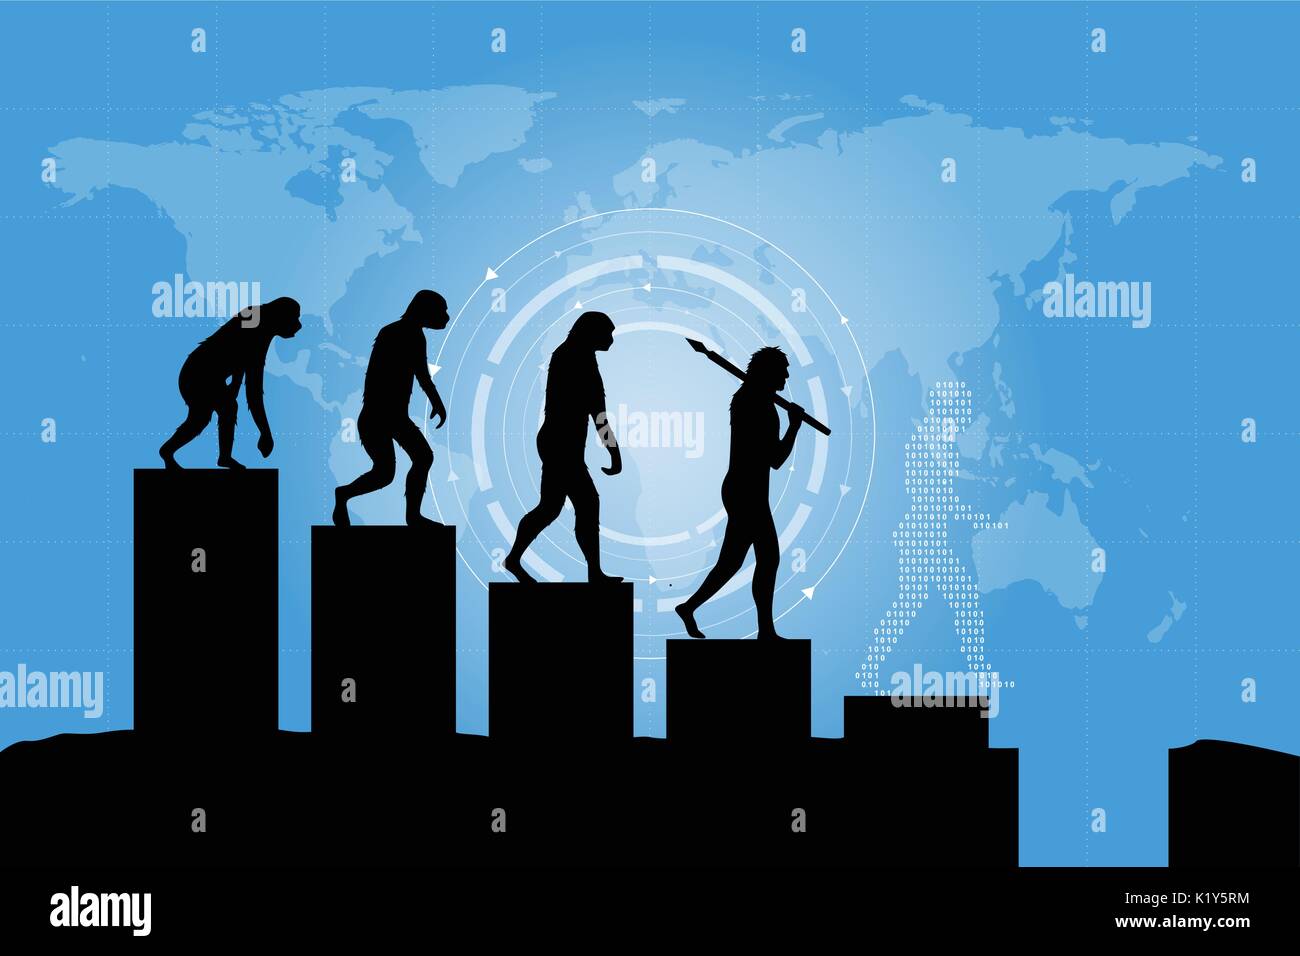 Human evolution into the present digital world. Business risk concept! Silhouette of human evolution in a negative way. Stock Vector